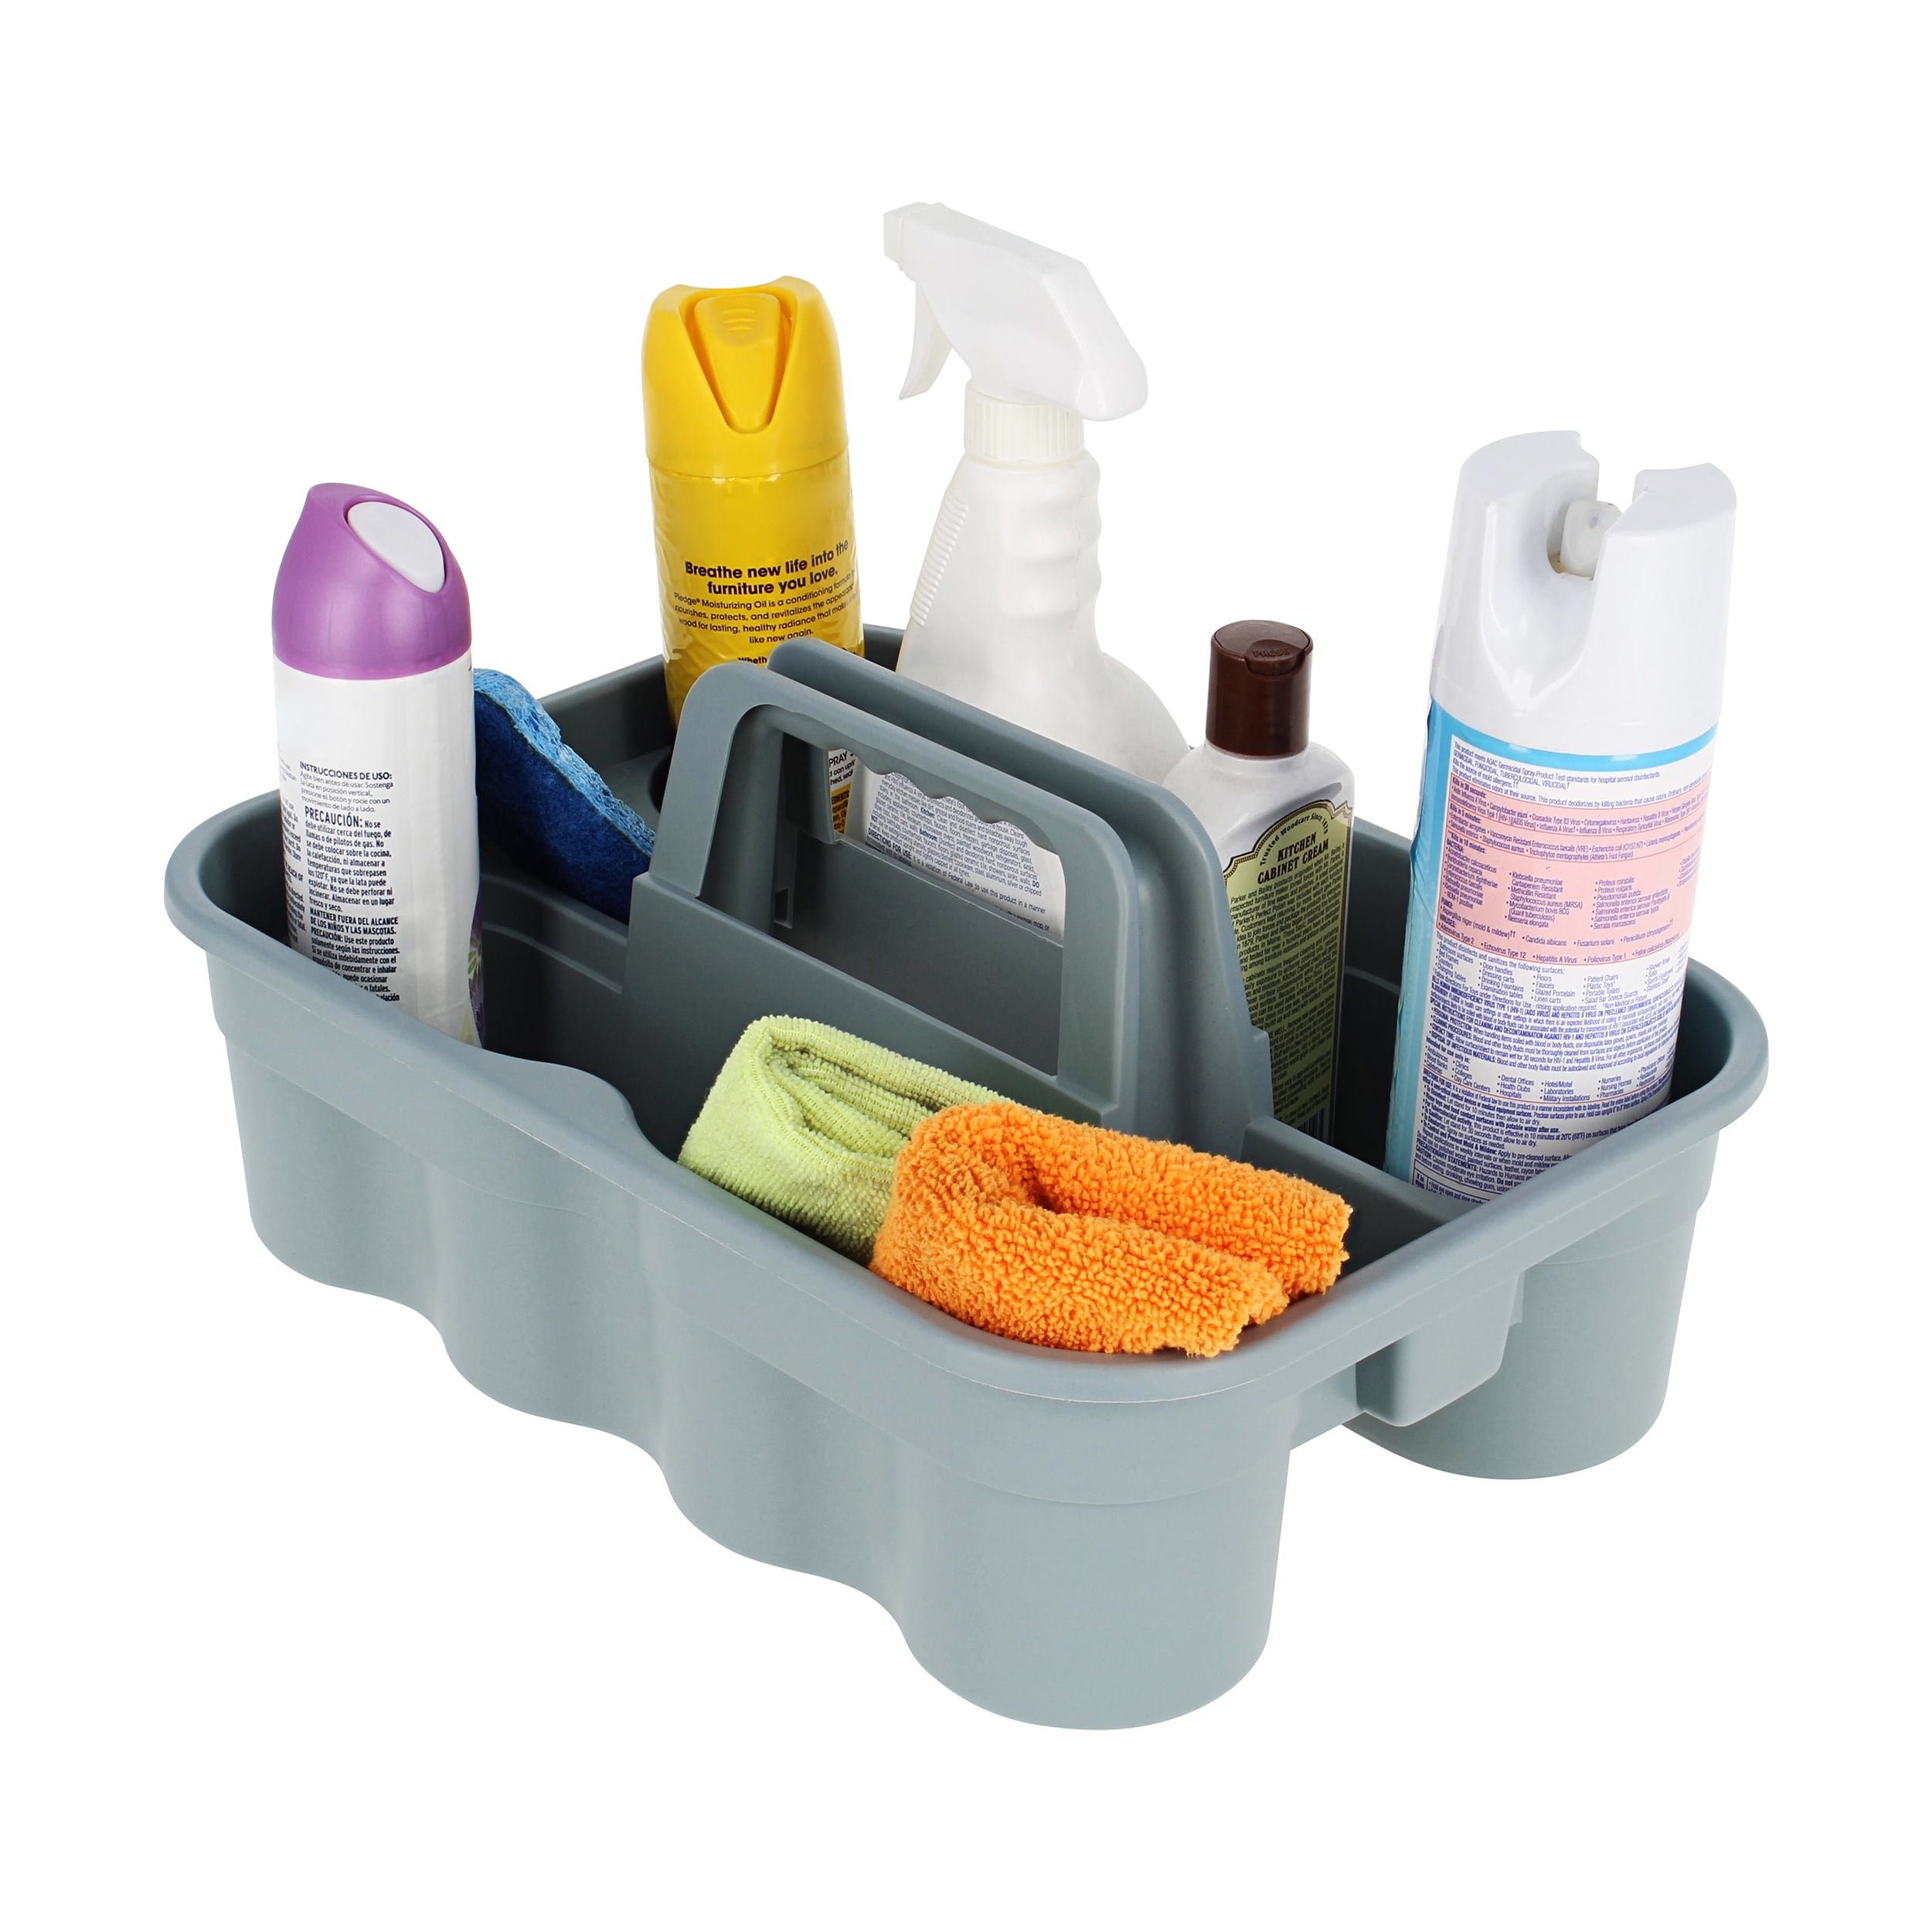 Alpine Industries 4-Compartment Polypropylene Cleaning Caddy at